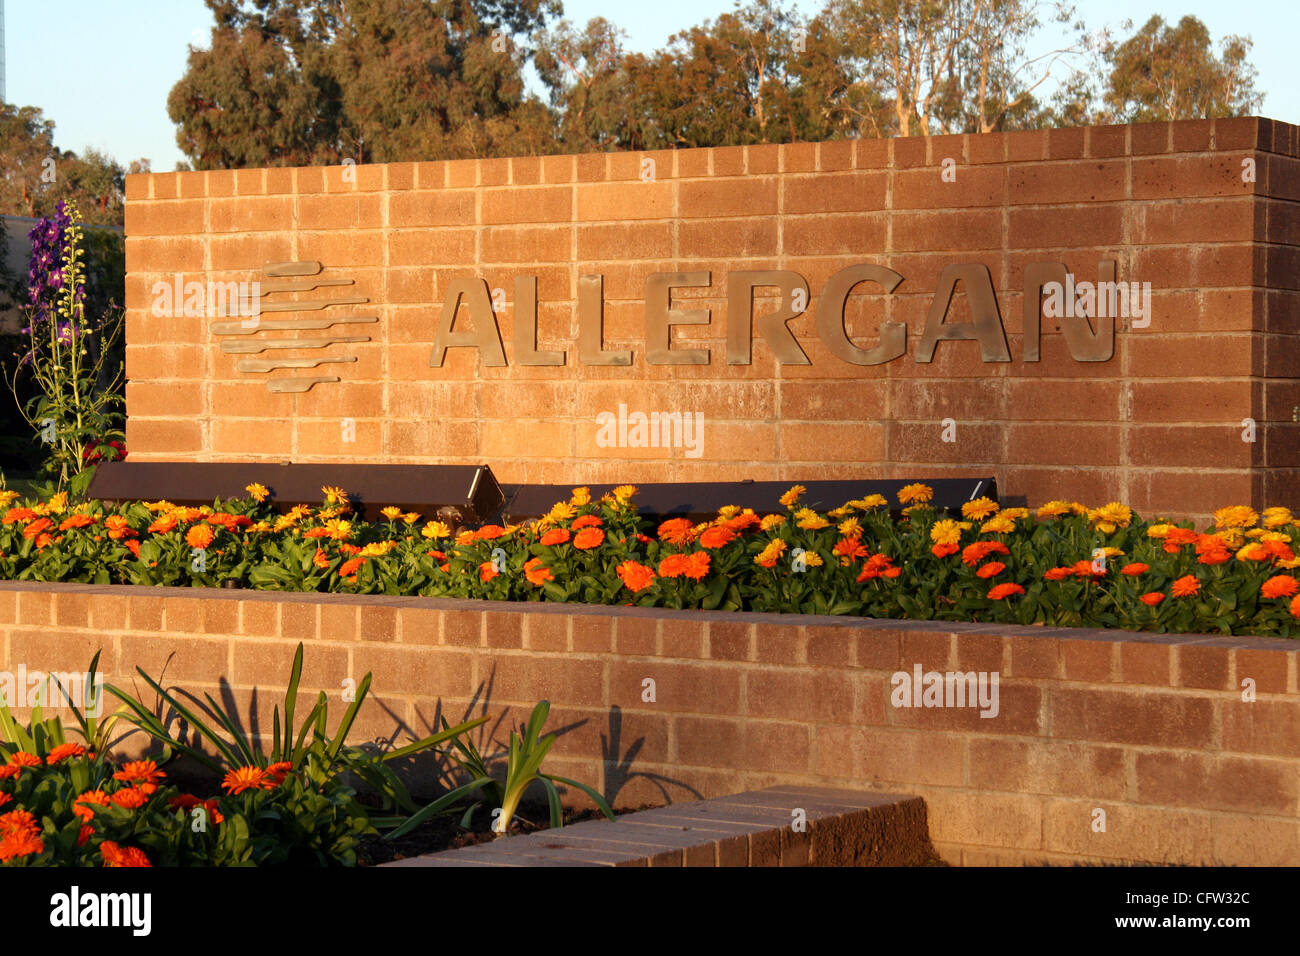 Feb 02, 2007; Irvine, CA, USA; Allergan, Inc., with headquarters in Irvine, California, is a global specialty pharmaceutical company that develops and commercializes innovative products for the eye care, neuromodulator, skin care and other specialty markets.  In addition to its discovery-to-developm Stock Photo